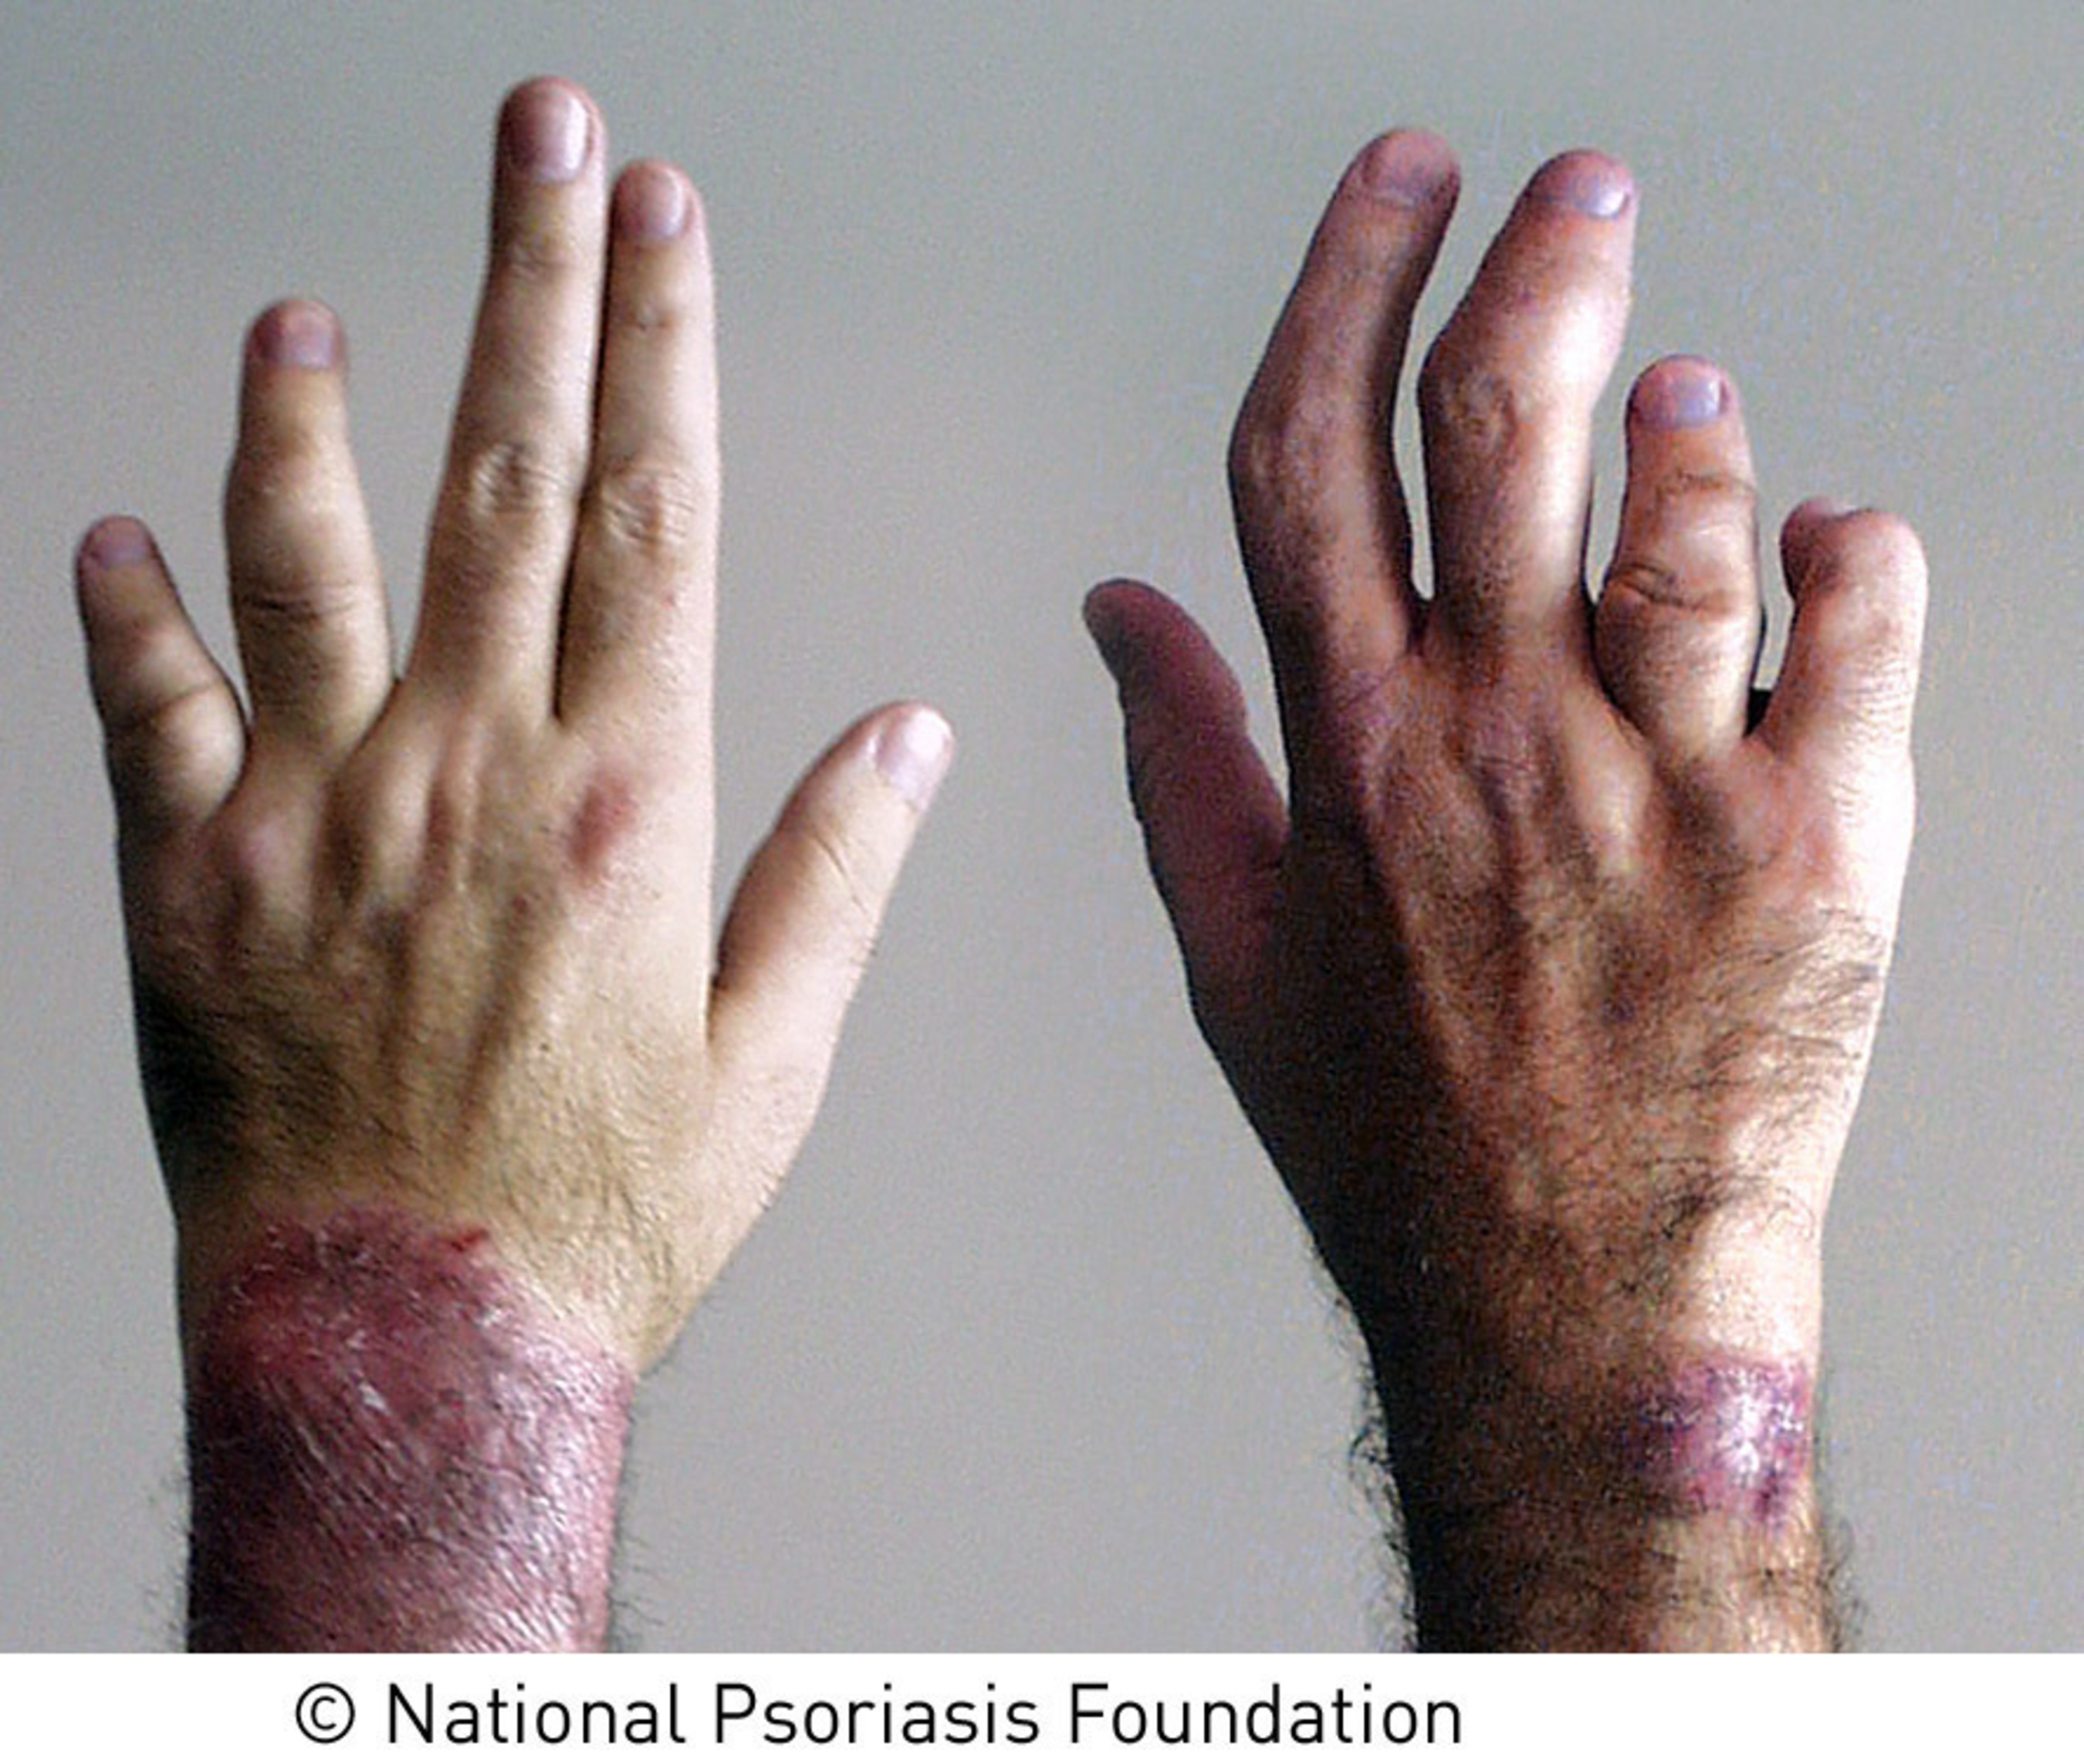 According to the National Psoriasis Foundation, psoriatic arthritis affects up to 30 percent of people with psoriasis. Symptoms of psoriatic arthritis include swollen, sausage-like fingers and toes, pain and swelling over the tendons, nail changes, and pain, swelling and stiffness in the joints. If left untreated, psoriatic arthritis can be disabling.   (PRNewsFoto/National Psoriasis Foundation)